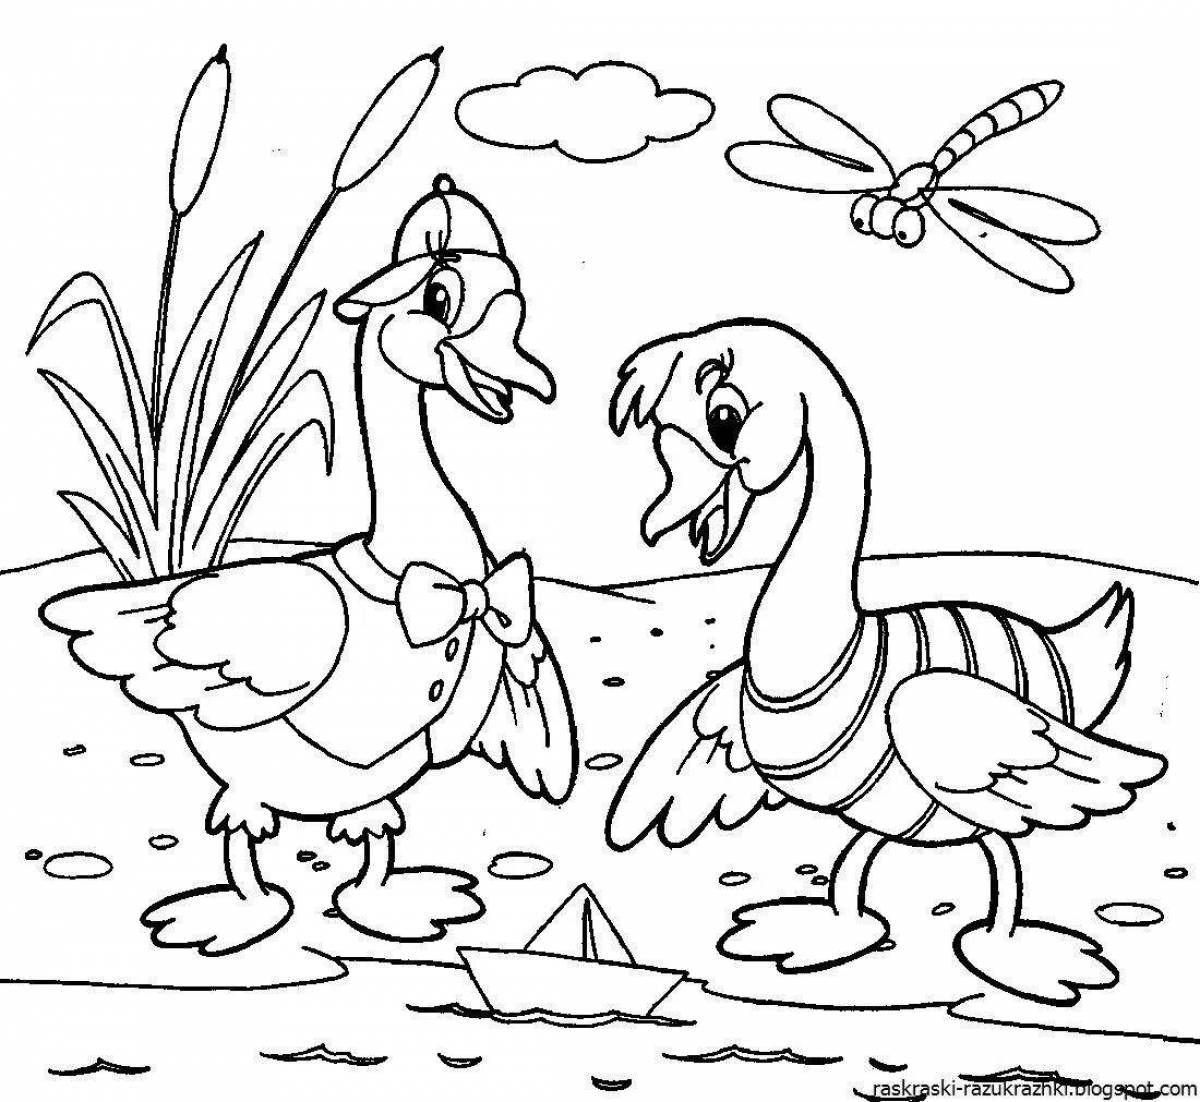 Coloring book dazzling bird for little students